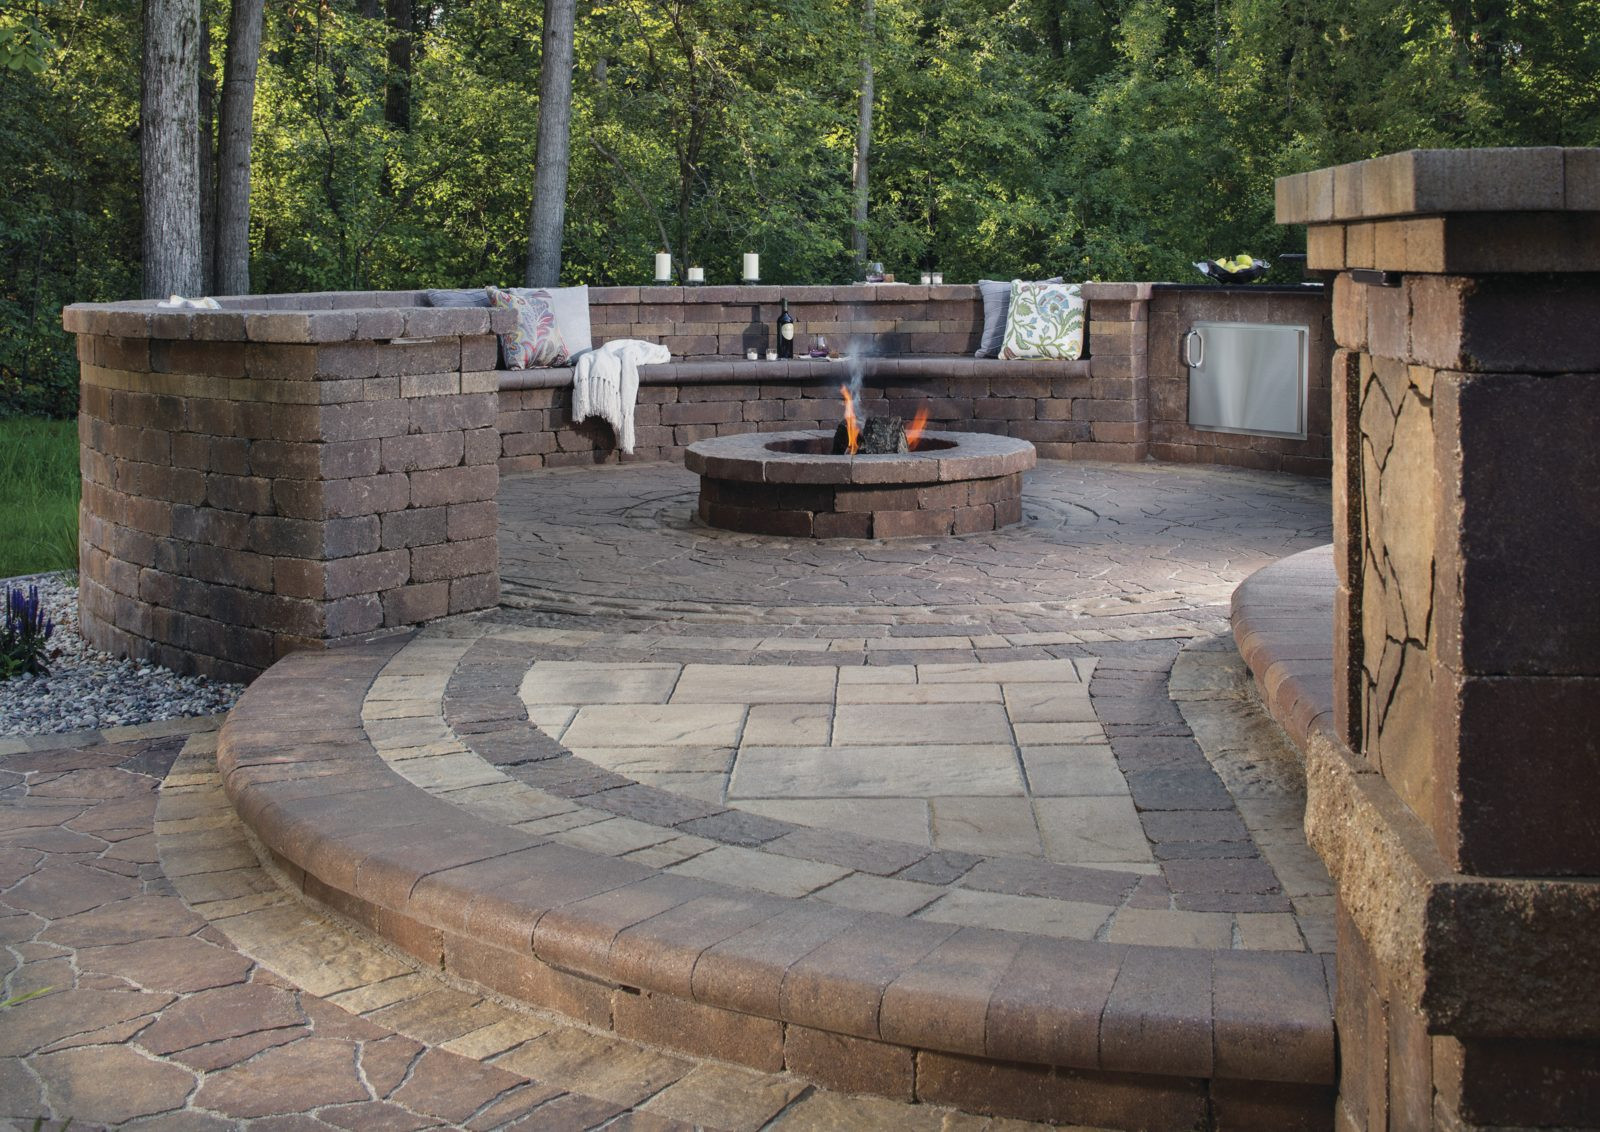 Stone Patio With Fire Pit
 Turn Up the Heat with These Cozy Fire Pit Patio Design